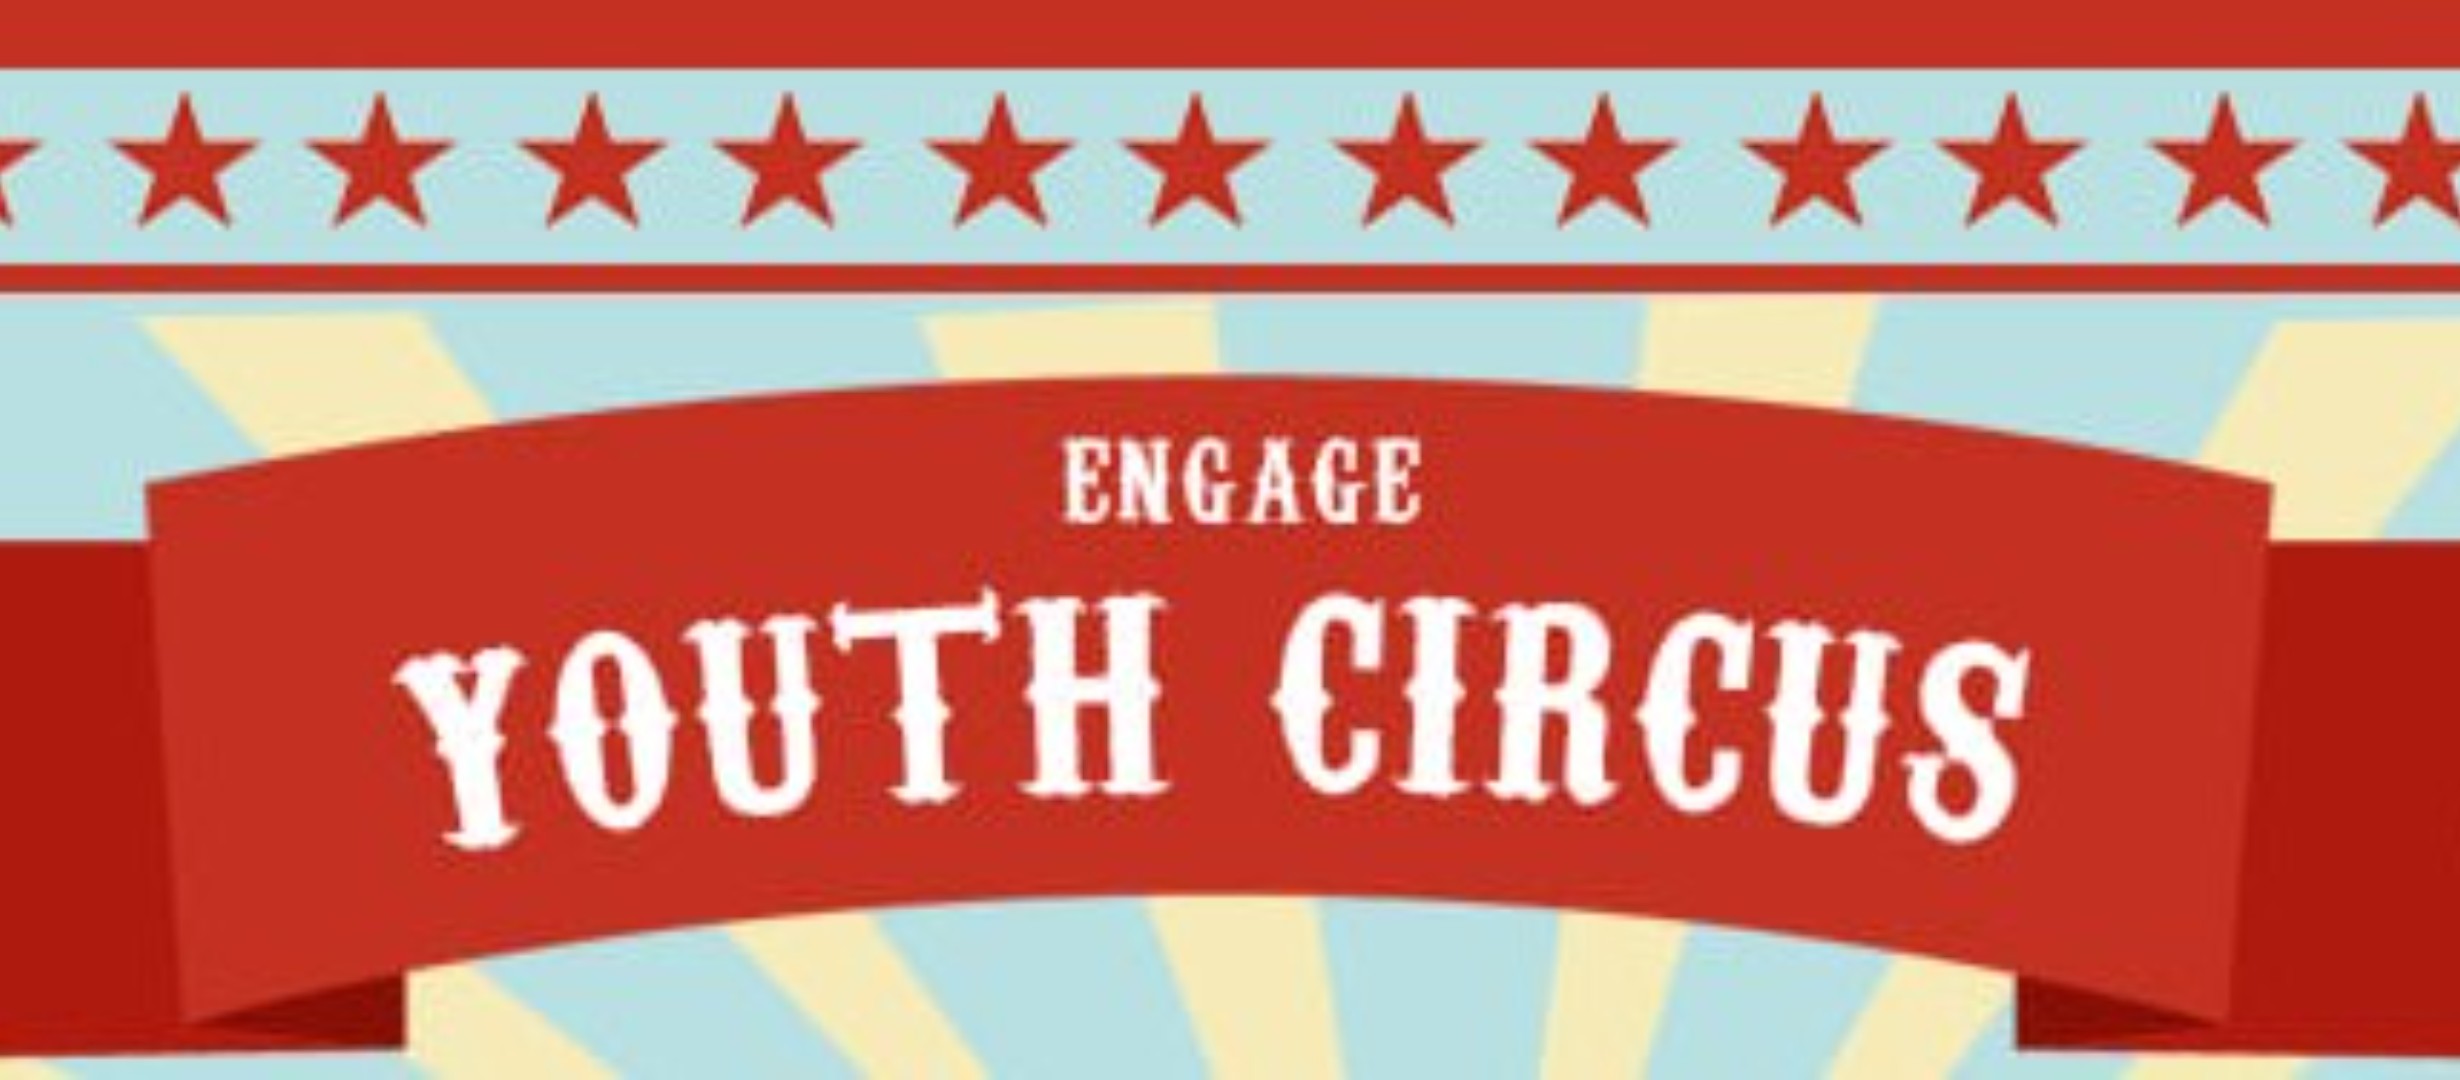 red banner text: Engage Youth Circus